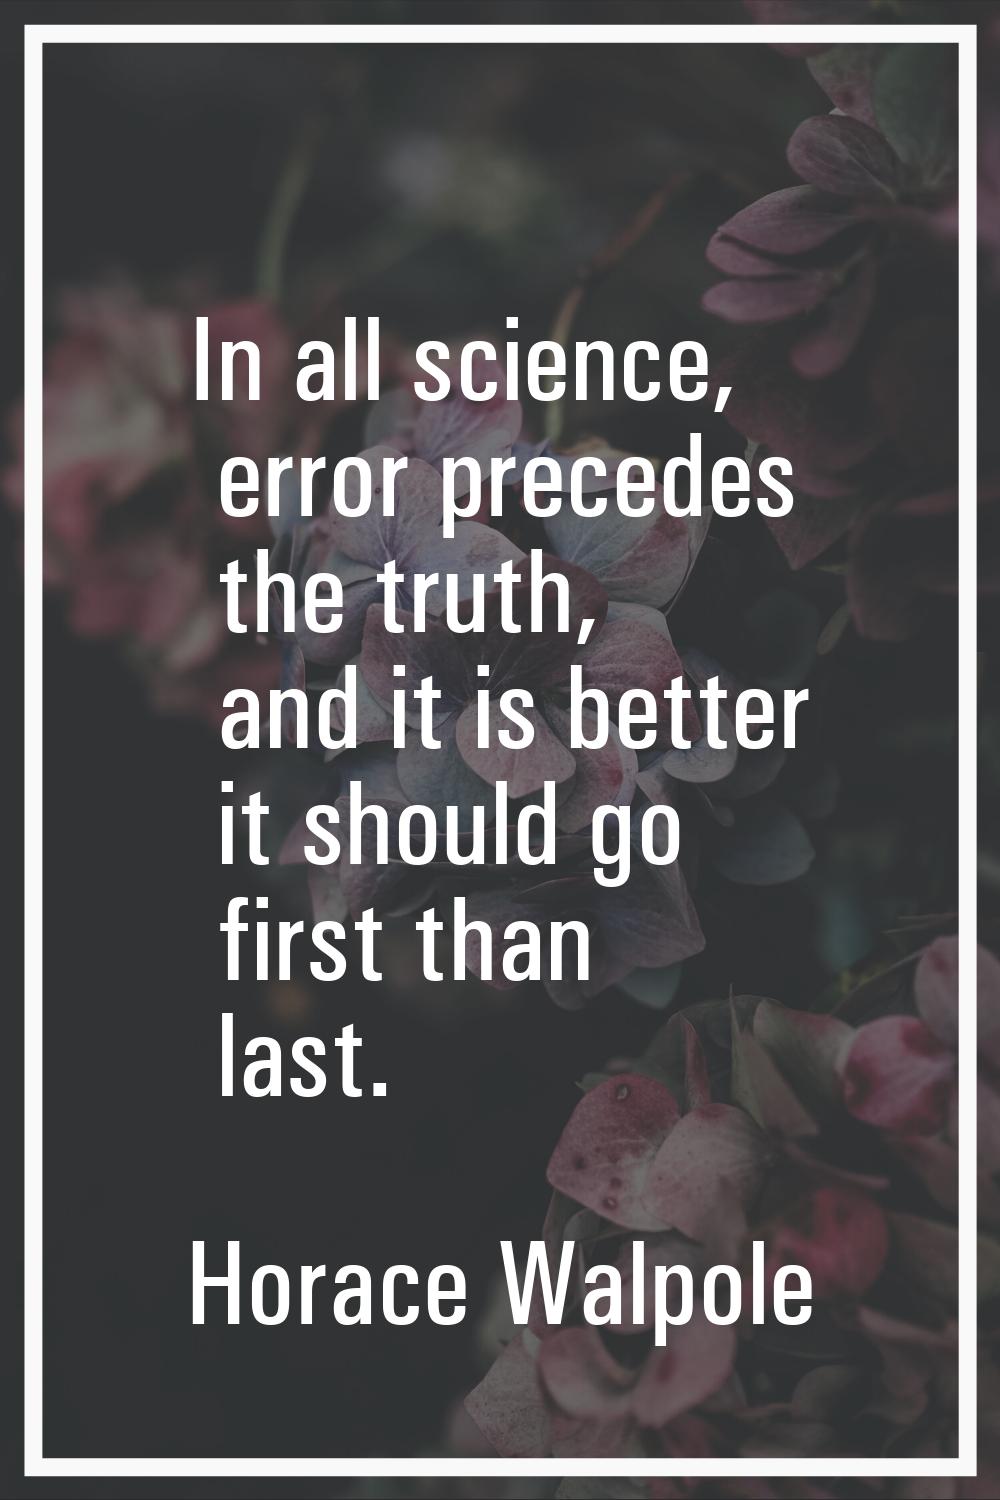 In all science, error precedes the truth, and it is better it should go first than last.